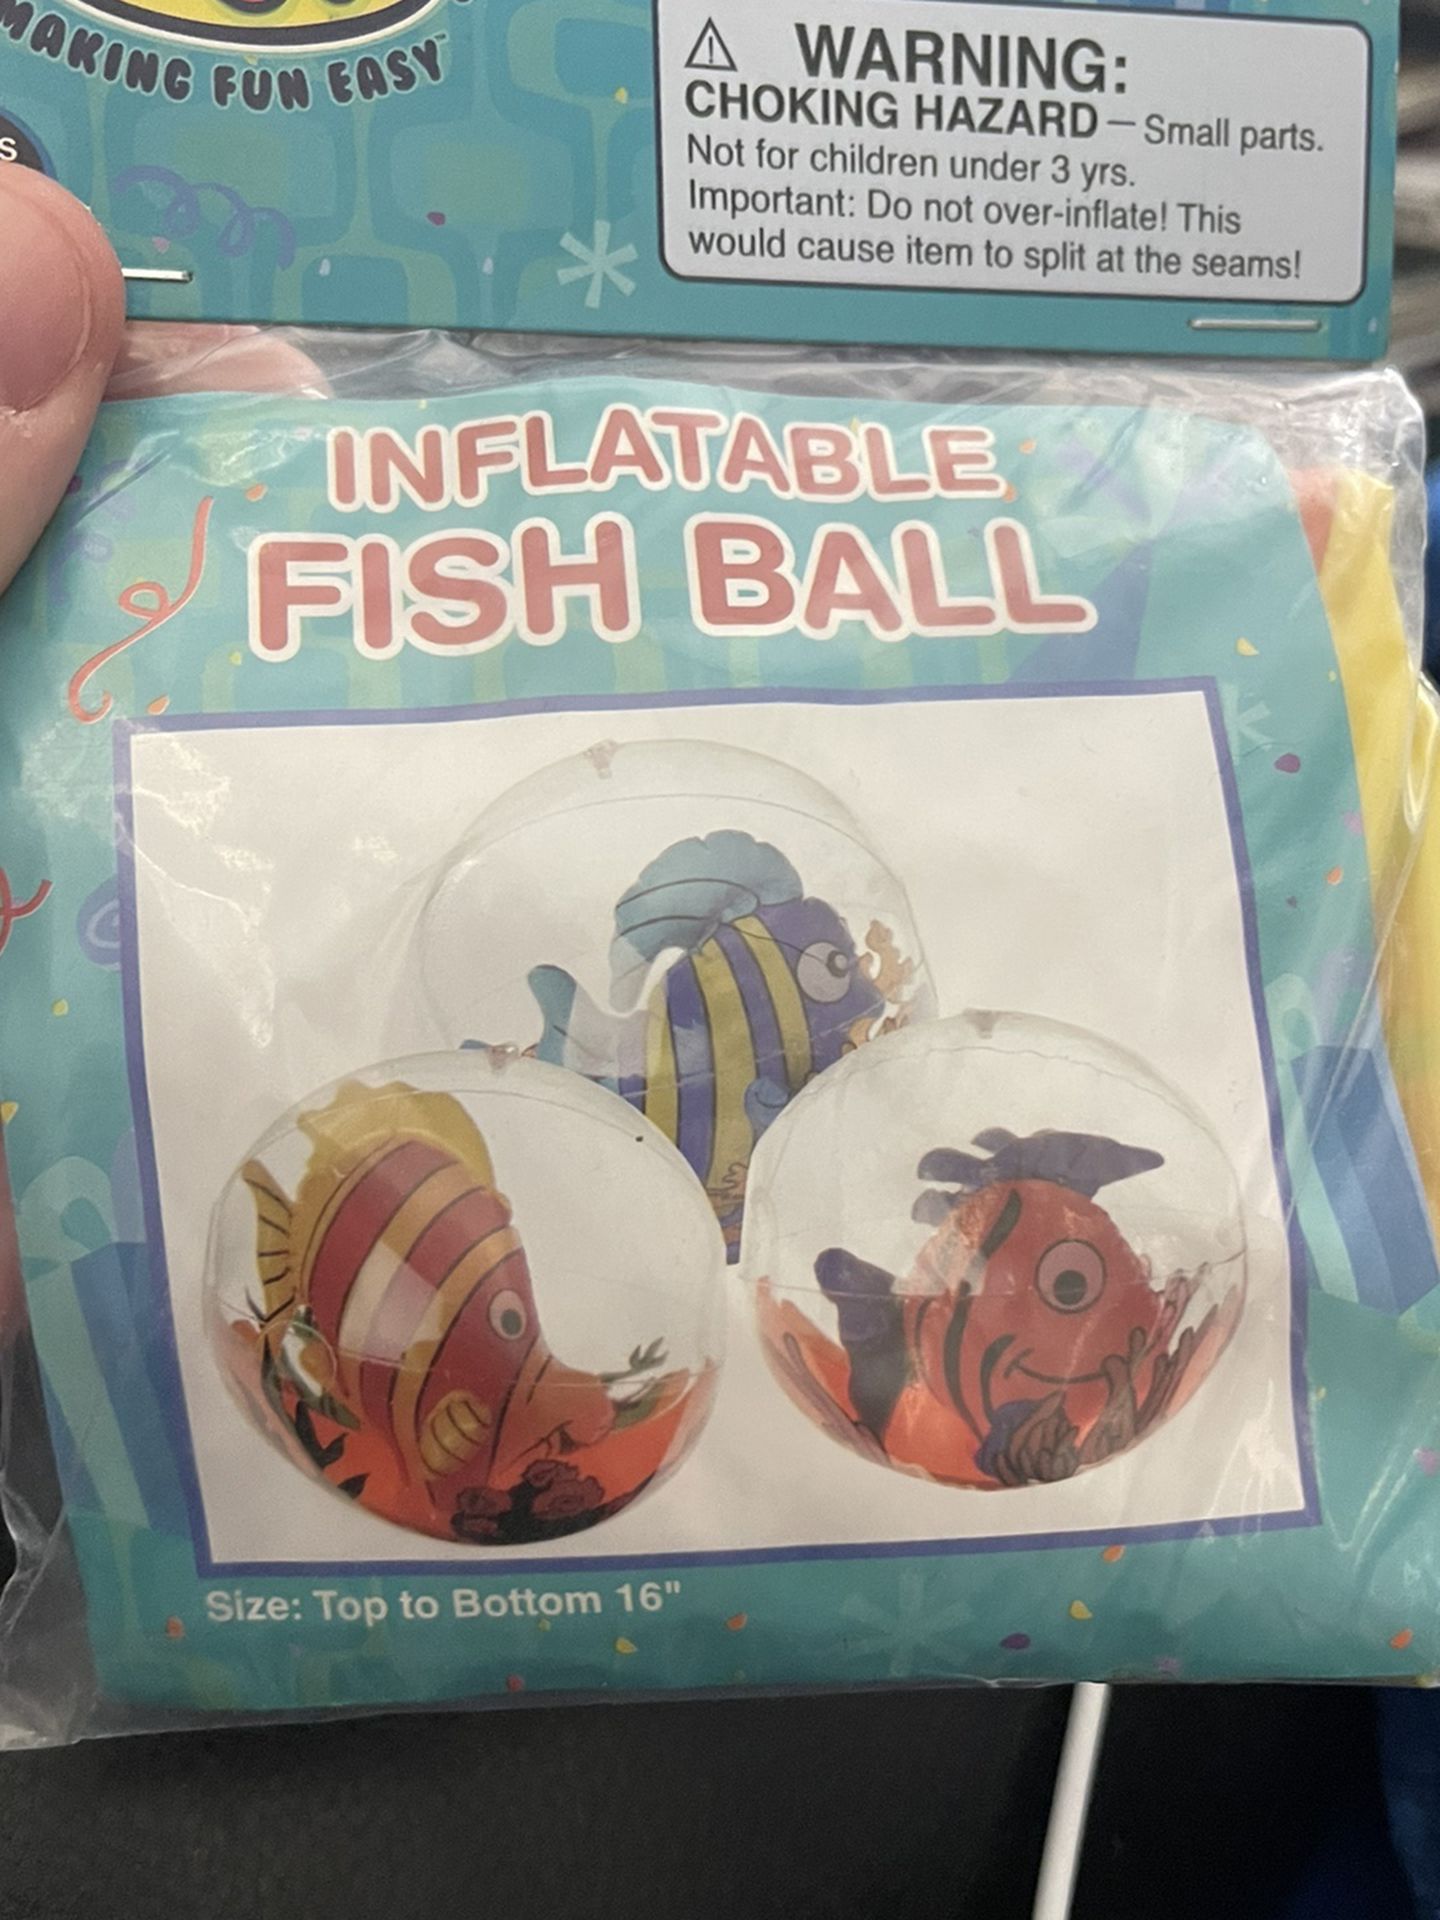 New Inflatable Fish Ball 16”!